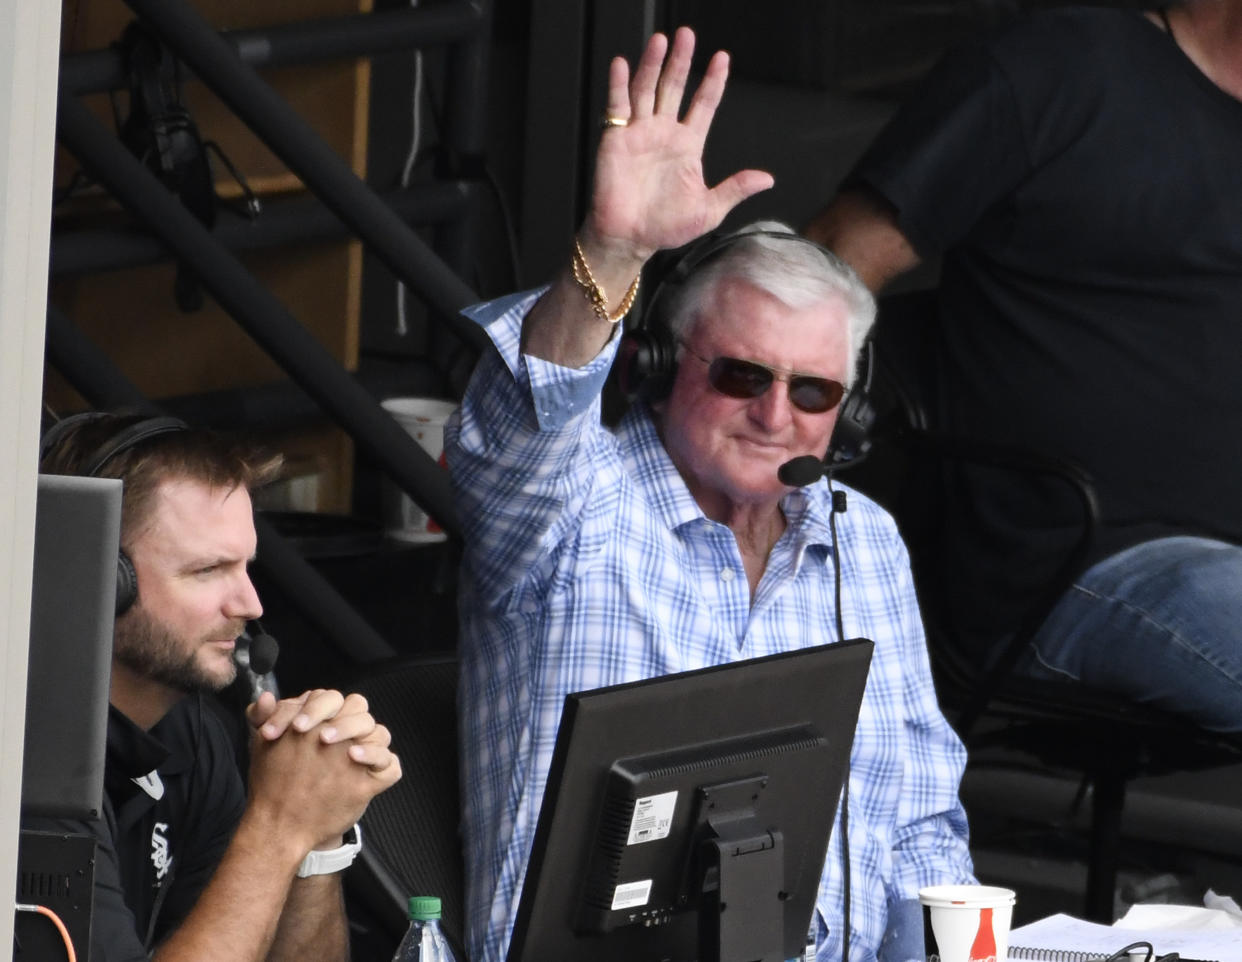 Longtime Chicago White Sox broadcaster Ken “Hawk” Harrelson bashed LeBron James and other athletes who speak out about social issues in the middle of Chicago’s game against Boston on Sunday. (Photo by David Banks/Getty Images)